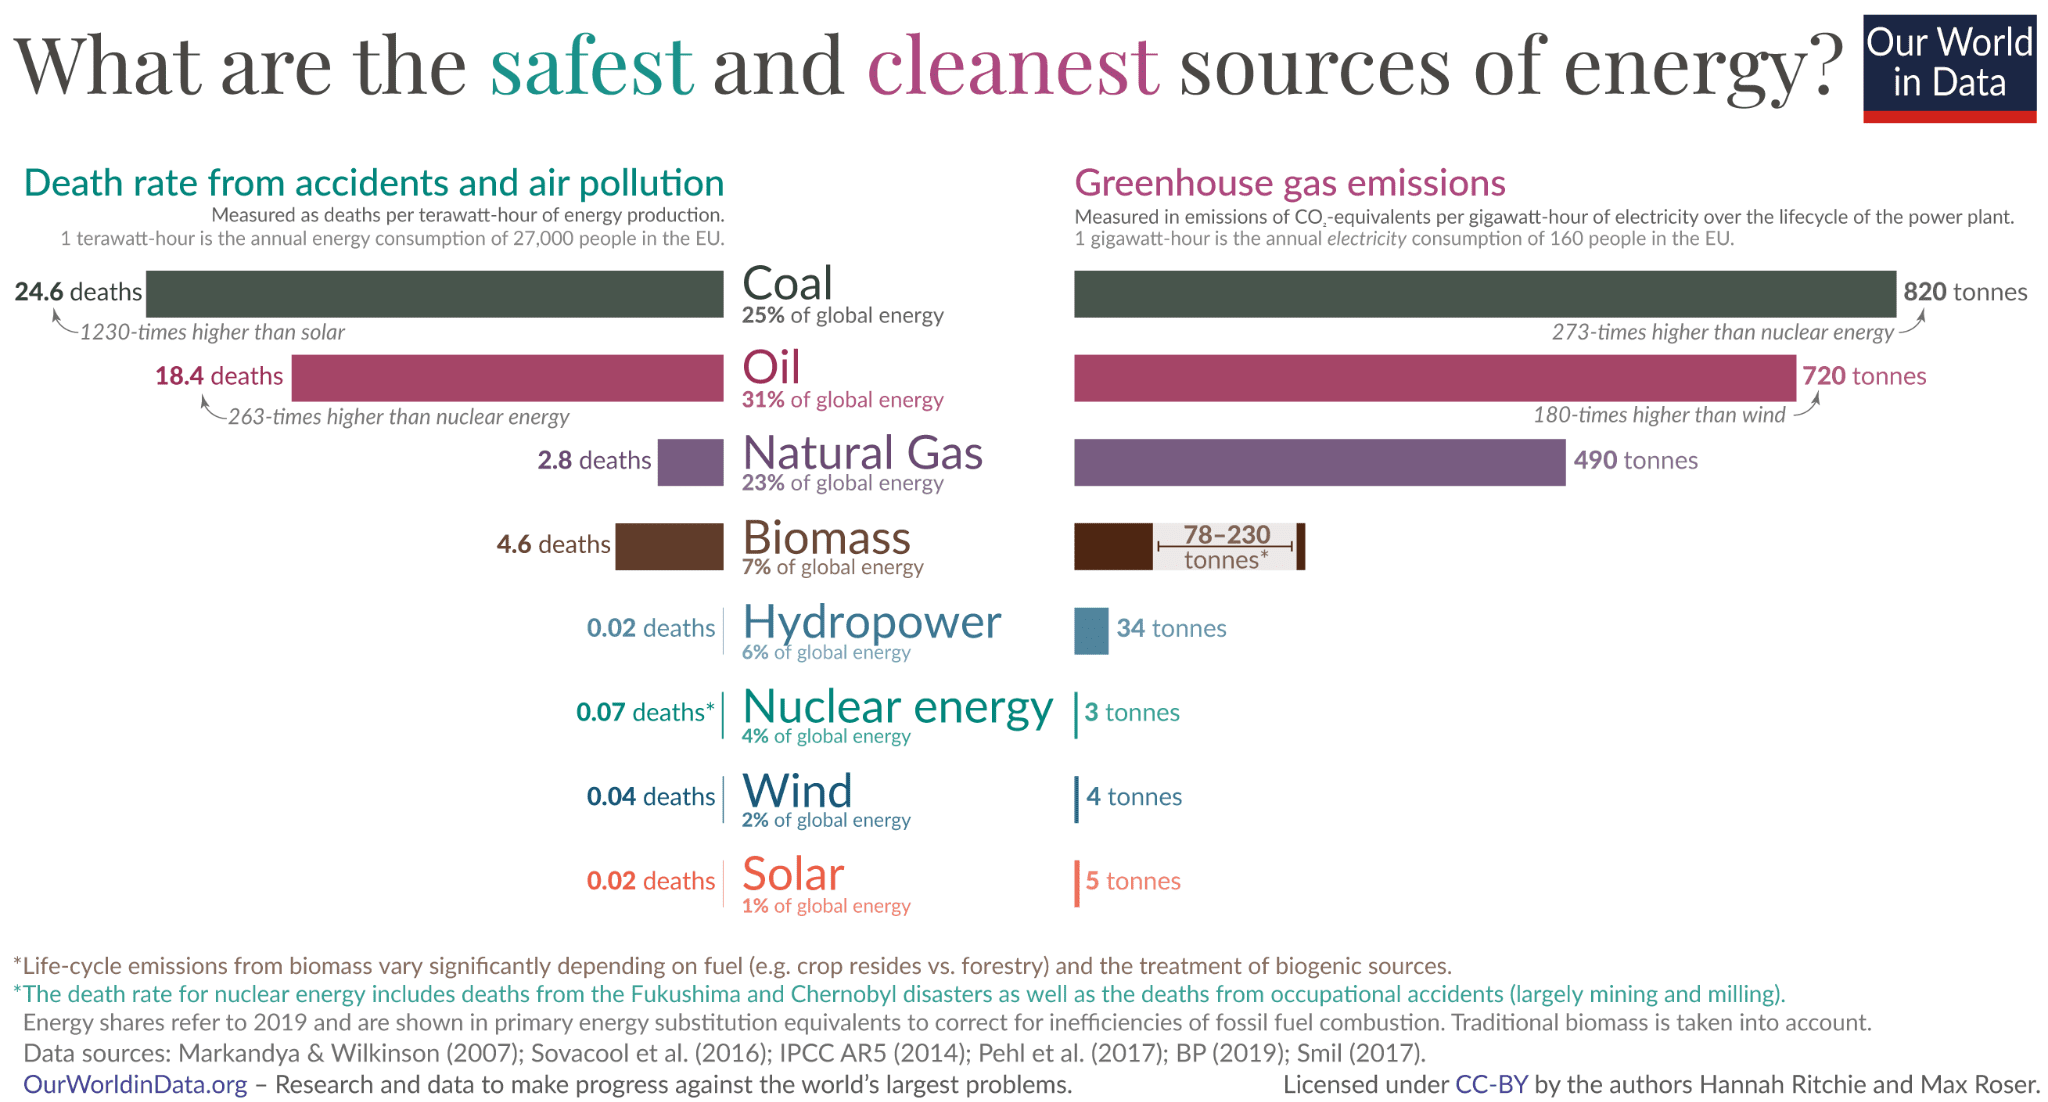 Bar graph shows the safest and cleanest sources of energy based on death rate from accidents and air pollution and greenhouse gas emissions